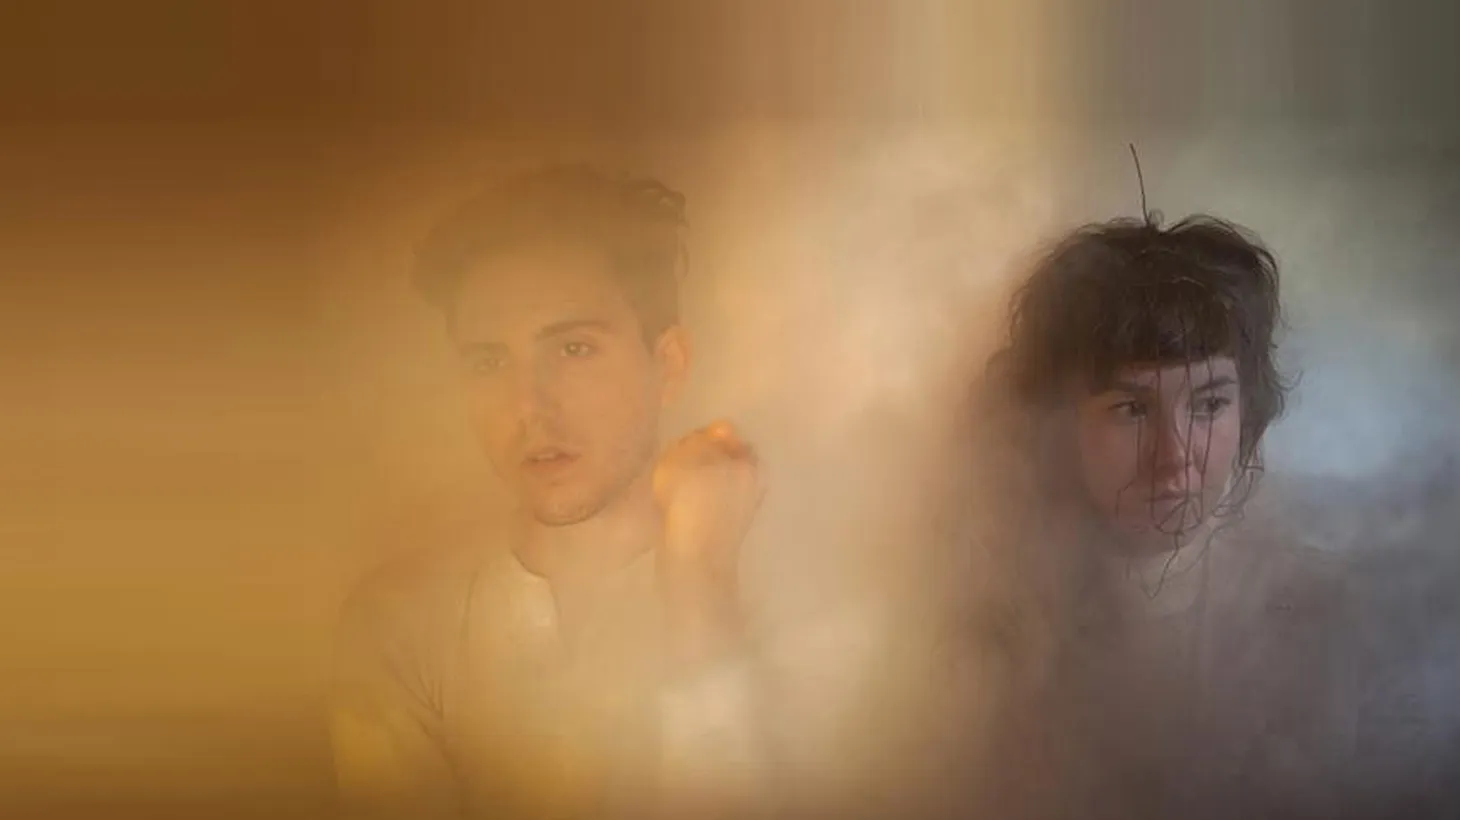 Purity Ring are purveyors of charming electro-pop. The Canadian duo released a confident, critically-acclaimed sophomore album earlier this year. We hear the new iteration of a trusted sound live on Morning Becomes Eclectic at 11:15am PDT.